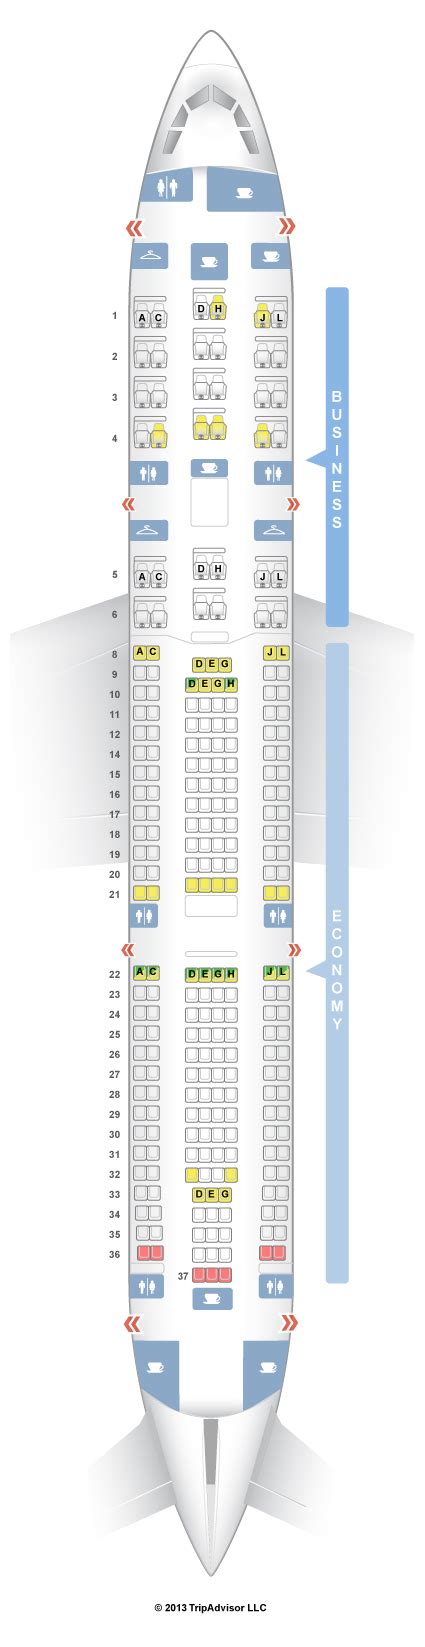 26 Iberia A330 Seat Map Maps Database Source